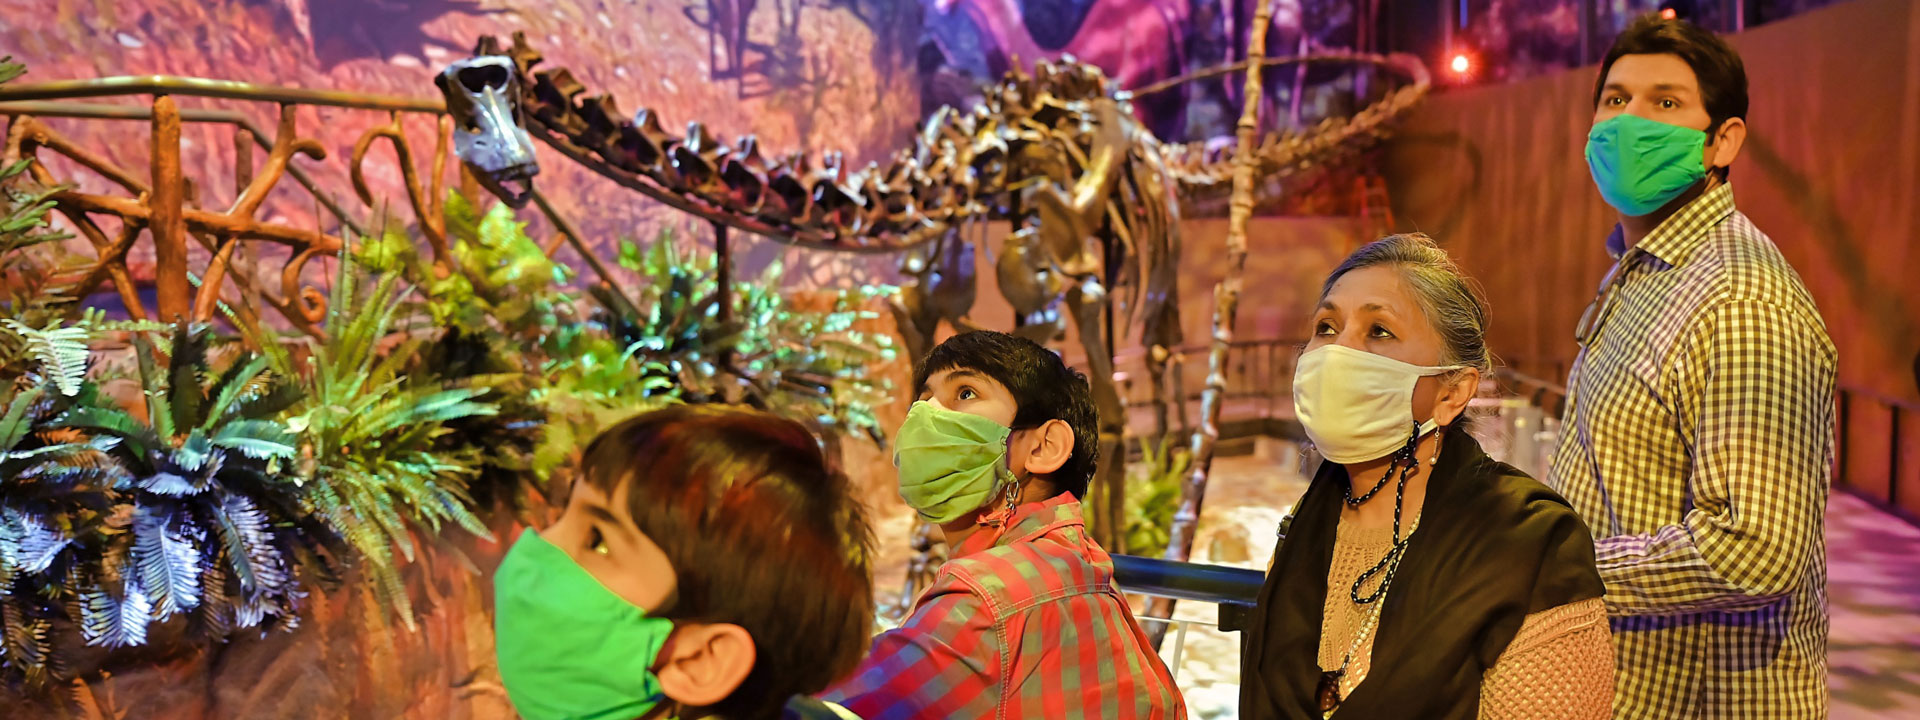 A group of people wearing masks and looking towards the left of the photo with a sauropod peering overhead behind them inside the Giants of the Jurassic area in the new Dinosphere at The Children's Museum of Indianapolis.